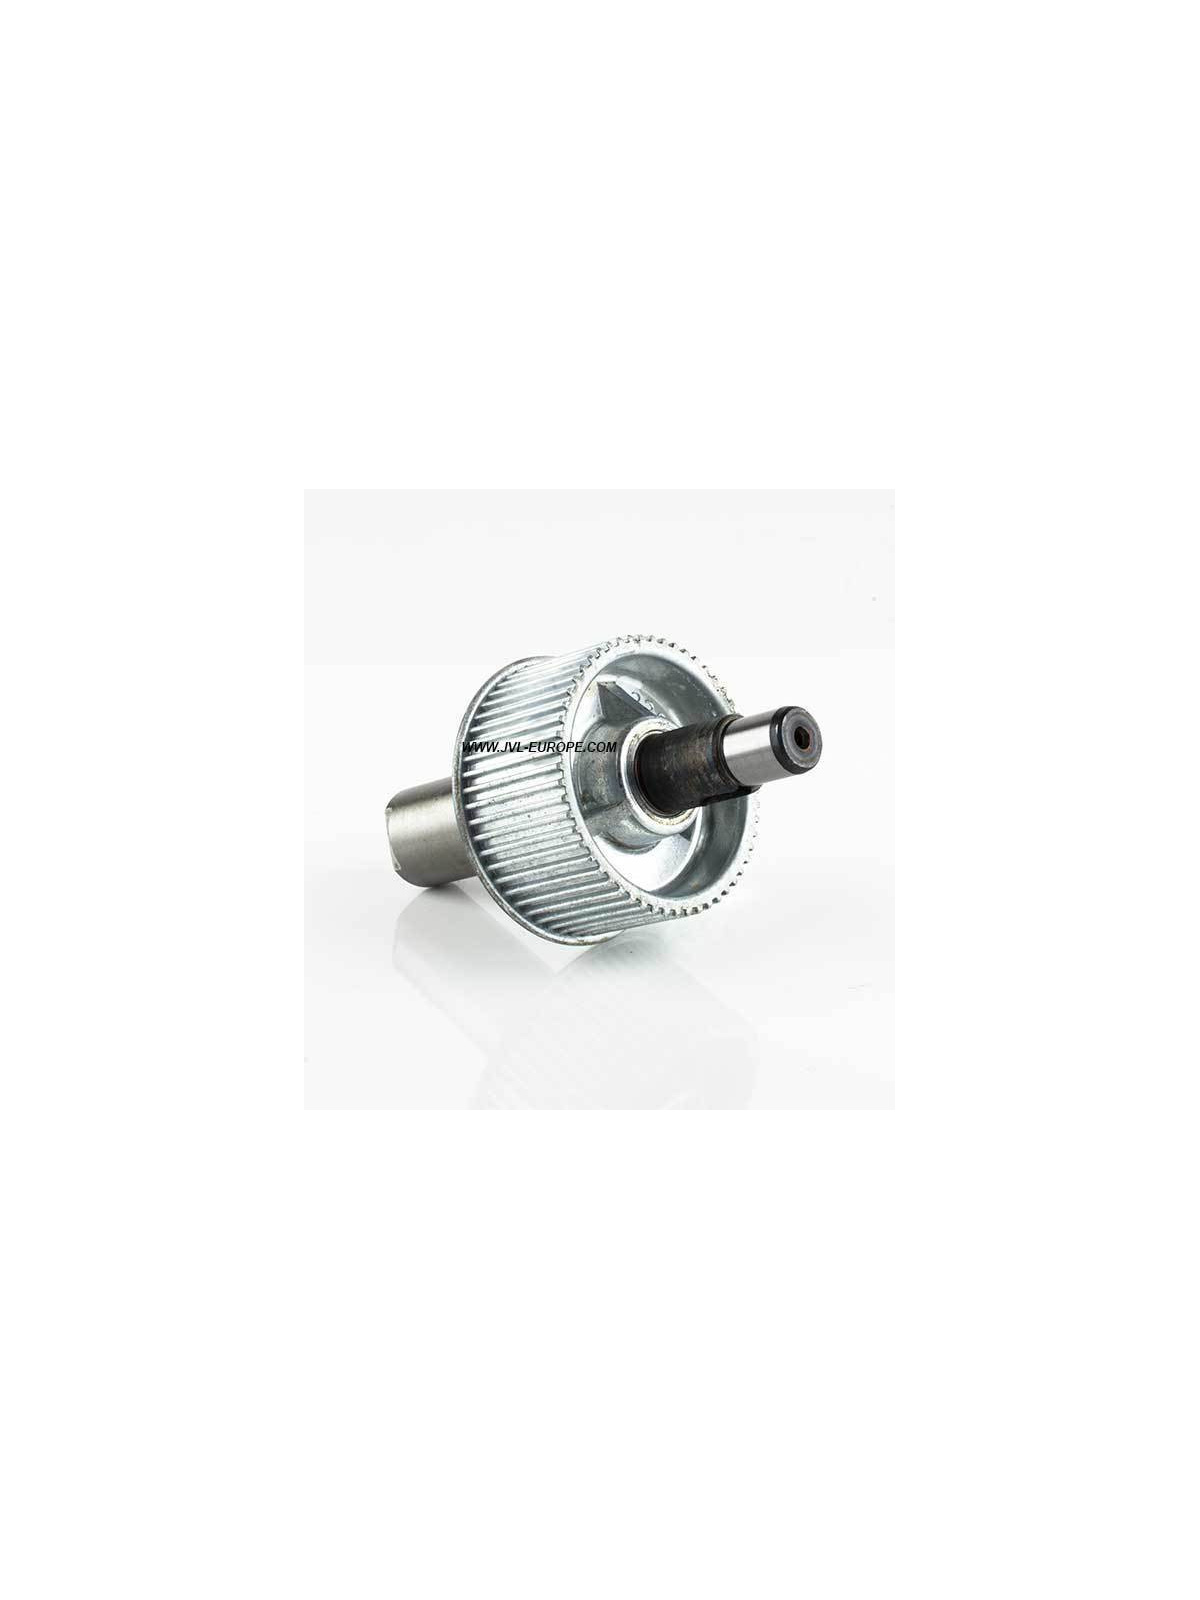 Virutex 3345212 Pulley with shaft | JVL-Europe